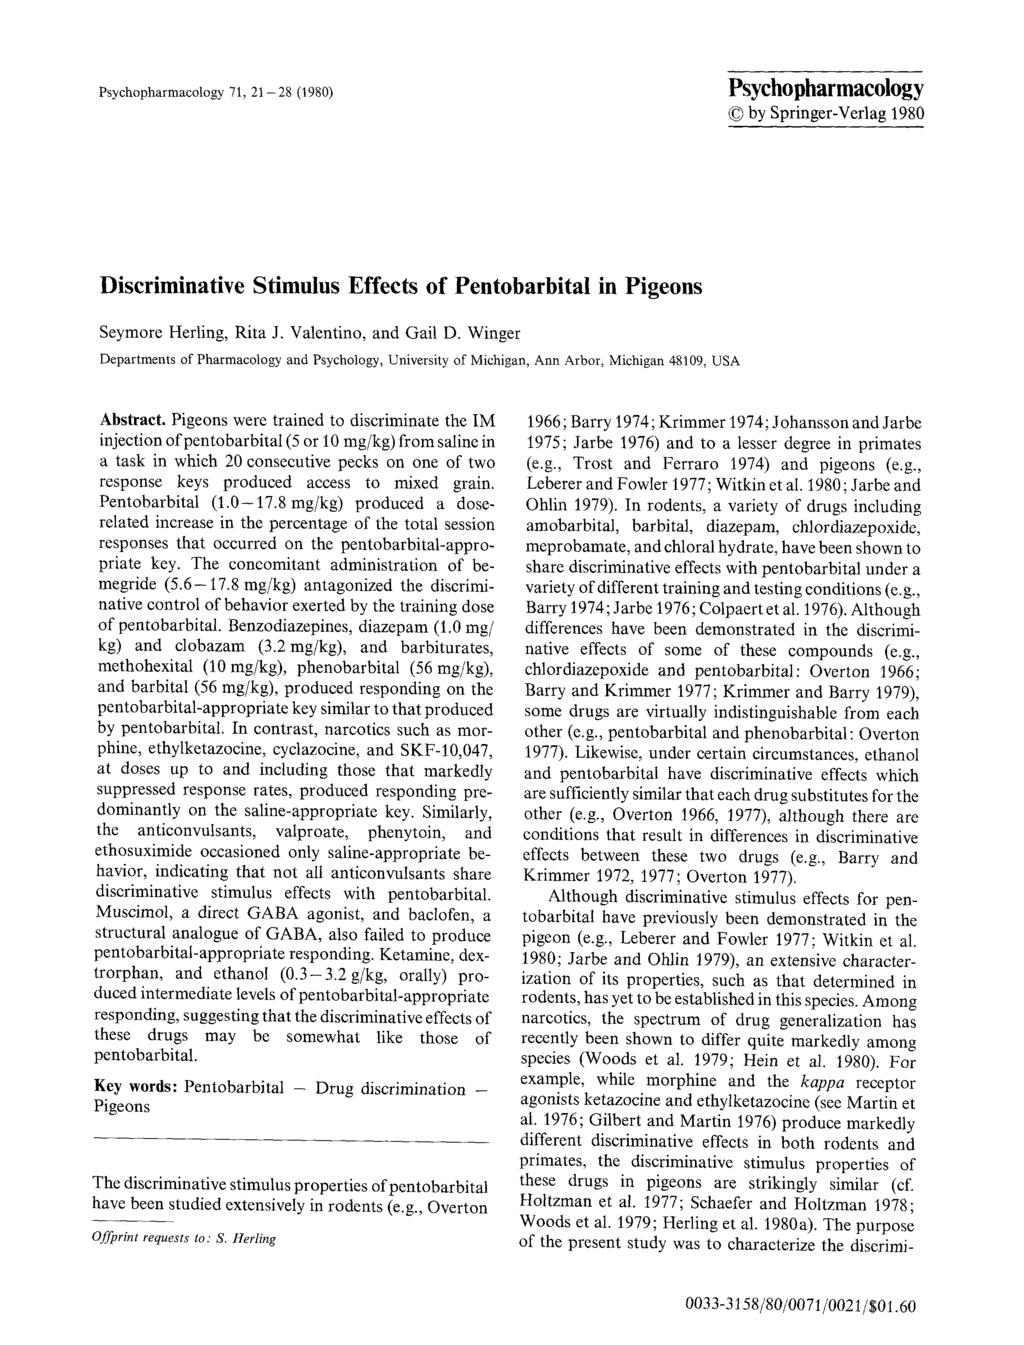 Psychopharmacology 71, 21-28 (1980) Psychopharmacology 9 by Springer-Verlag 1980 Discriminative Stimulus Effects of Pentobarbital in Pigeons Seymore Herling, Rita J. Valentino, and Gail D.